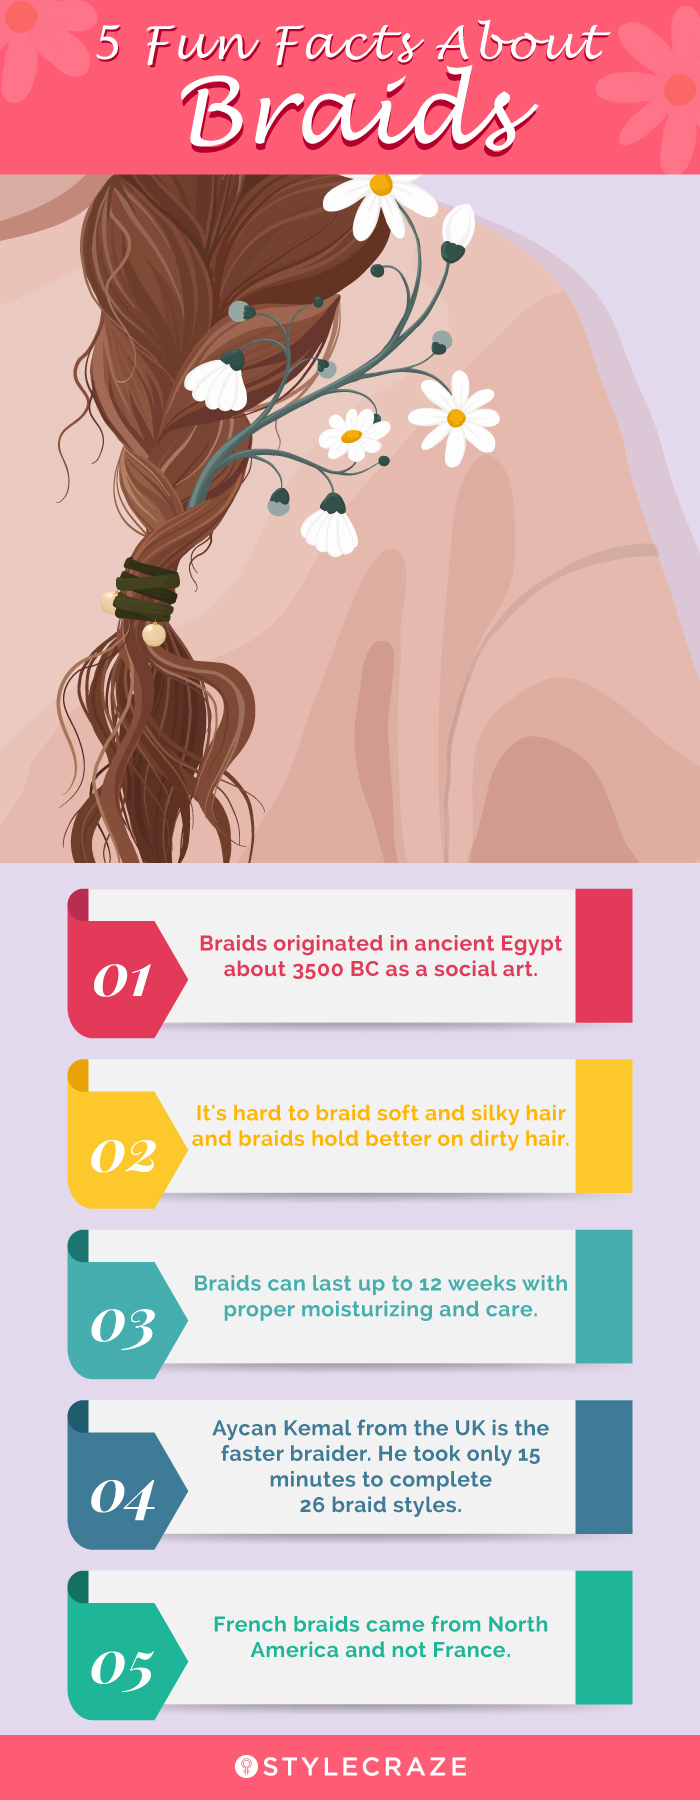 5 fun facts about braids (infographic)